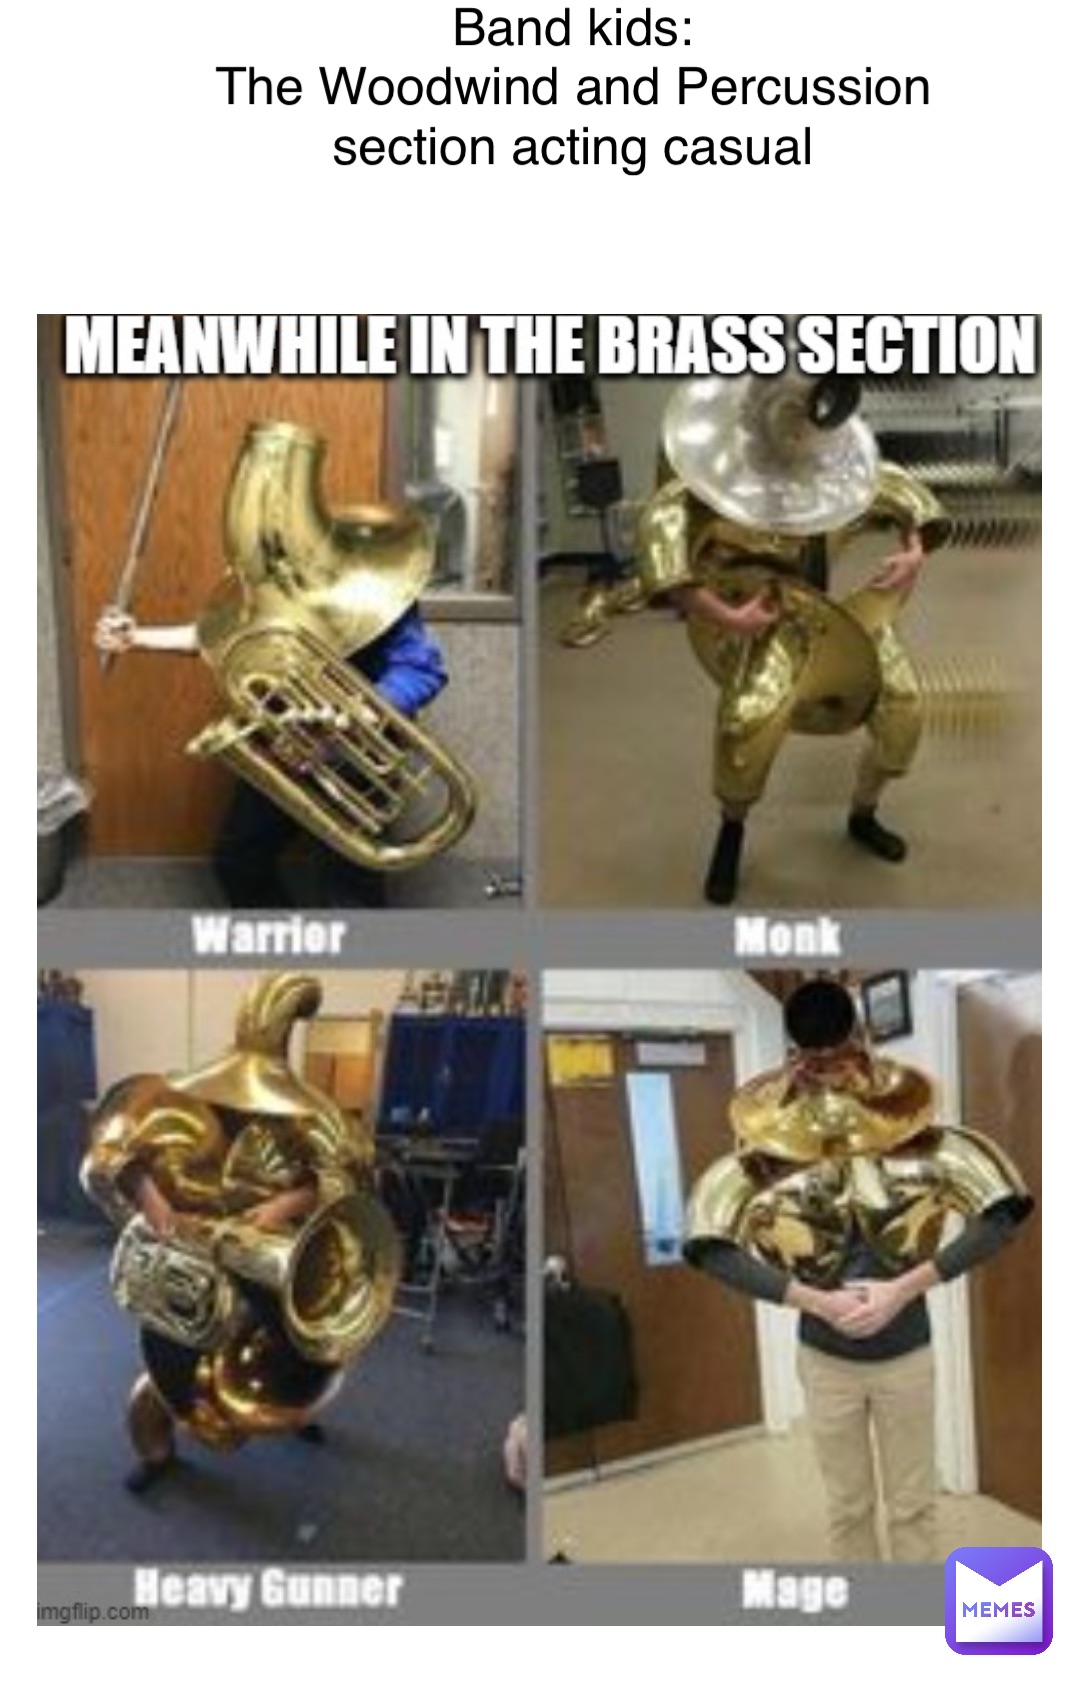 Band kids:
The Woodwind and Percussion section acting casual